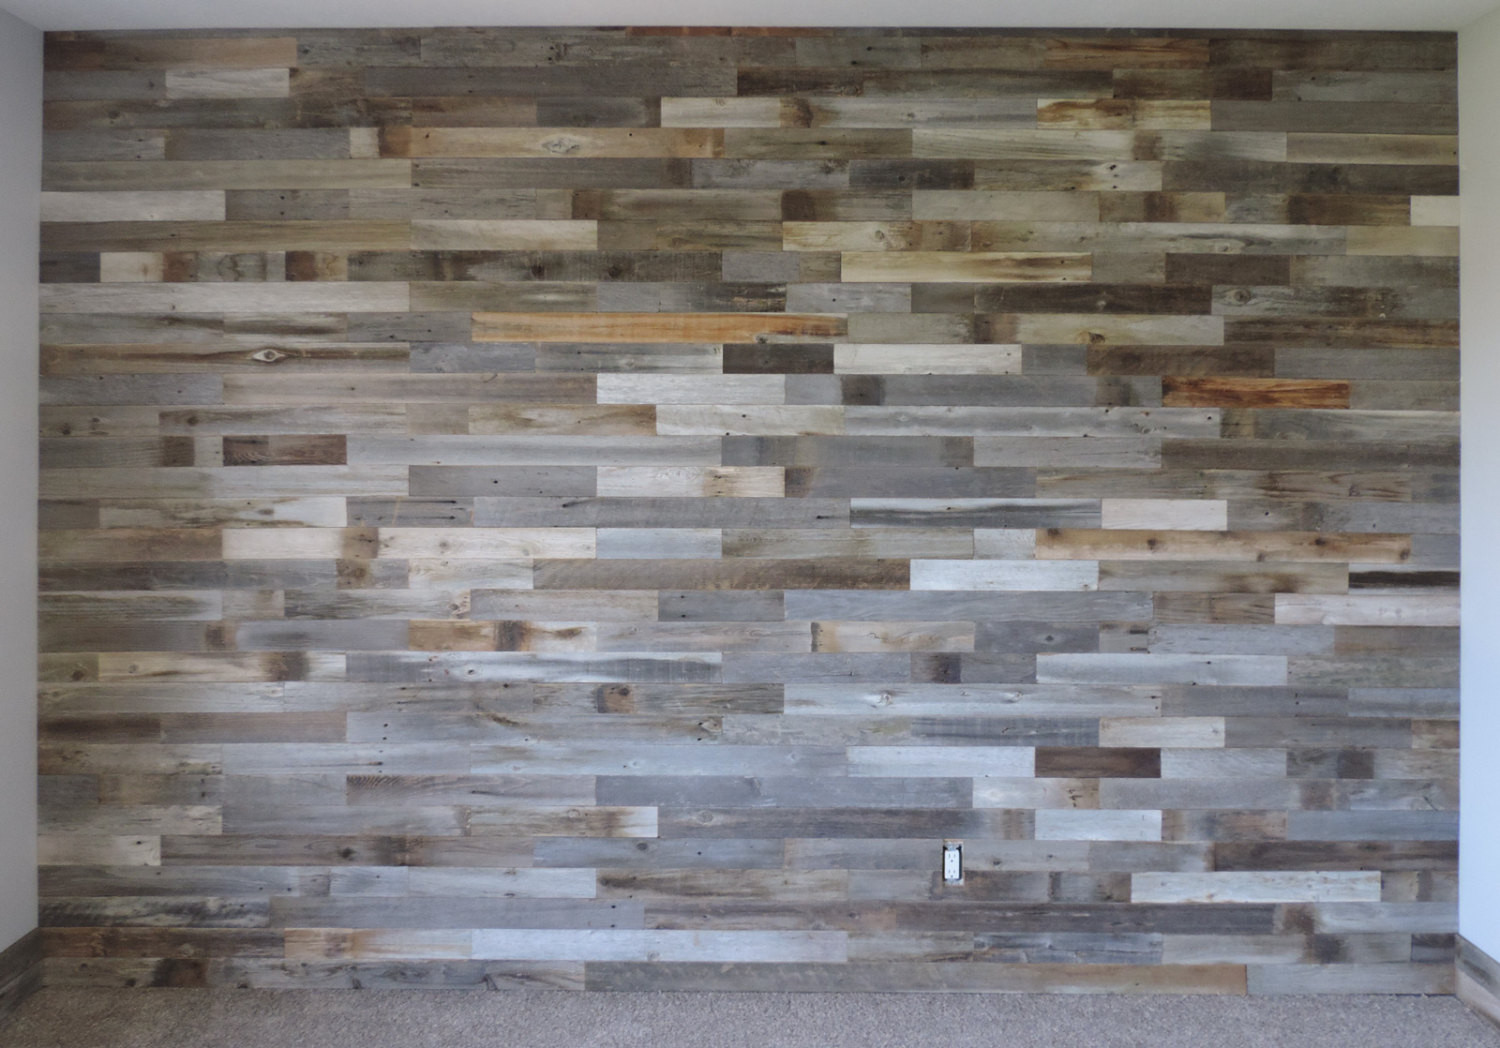 Wood Wall Paneling DIY
 Reclaimed Wood Wall Paneling DIY asst 3 inch boards by